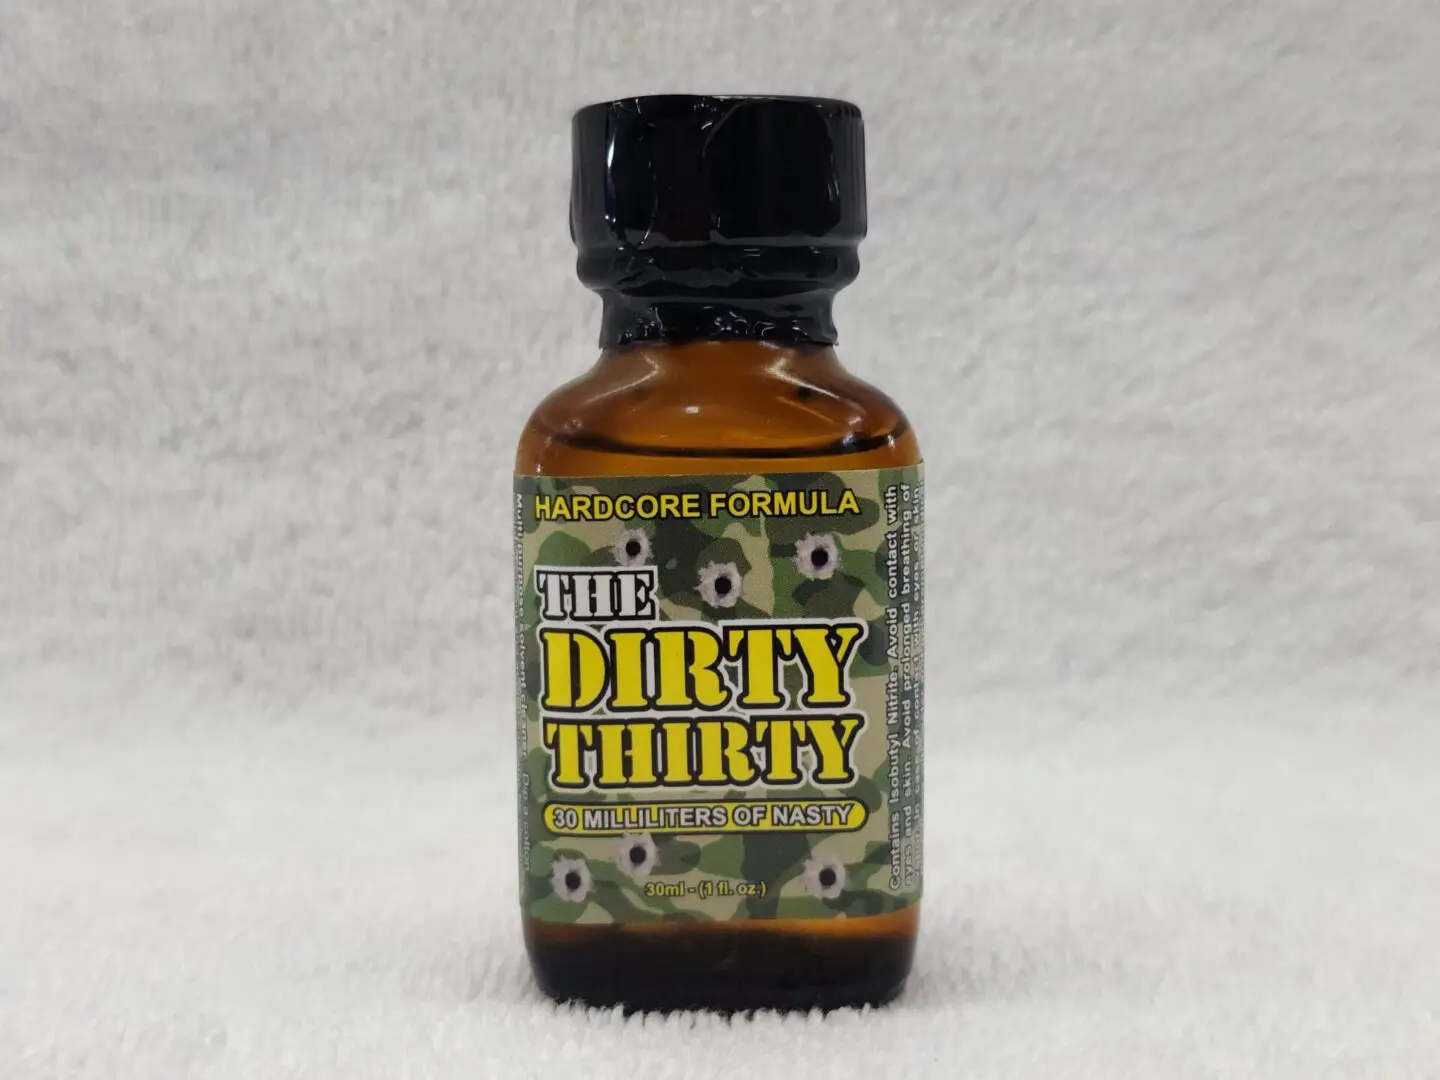 A bottle of dirty thirty poppers